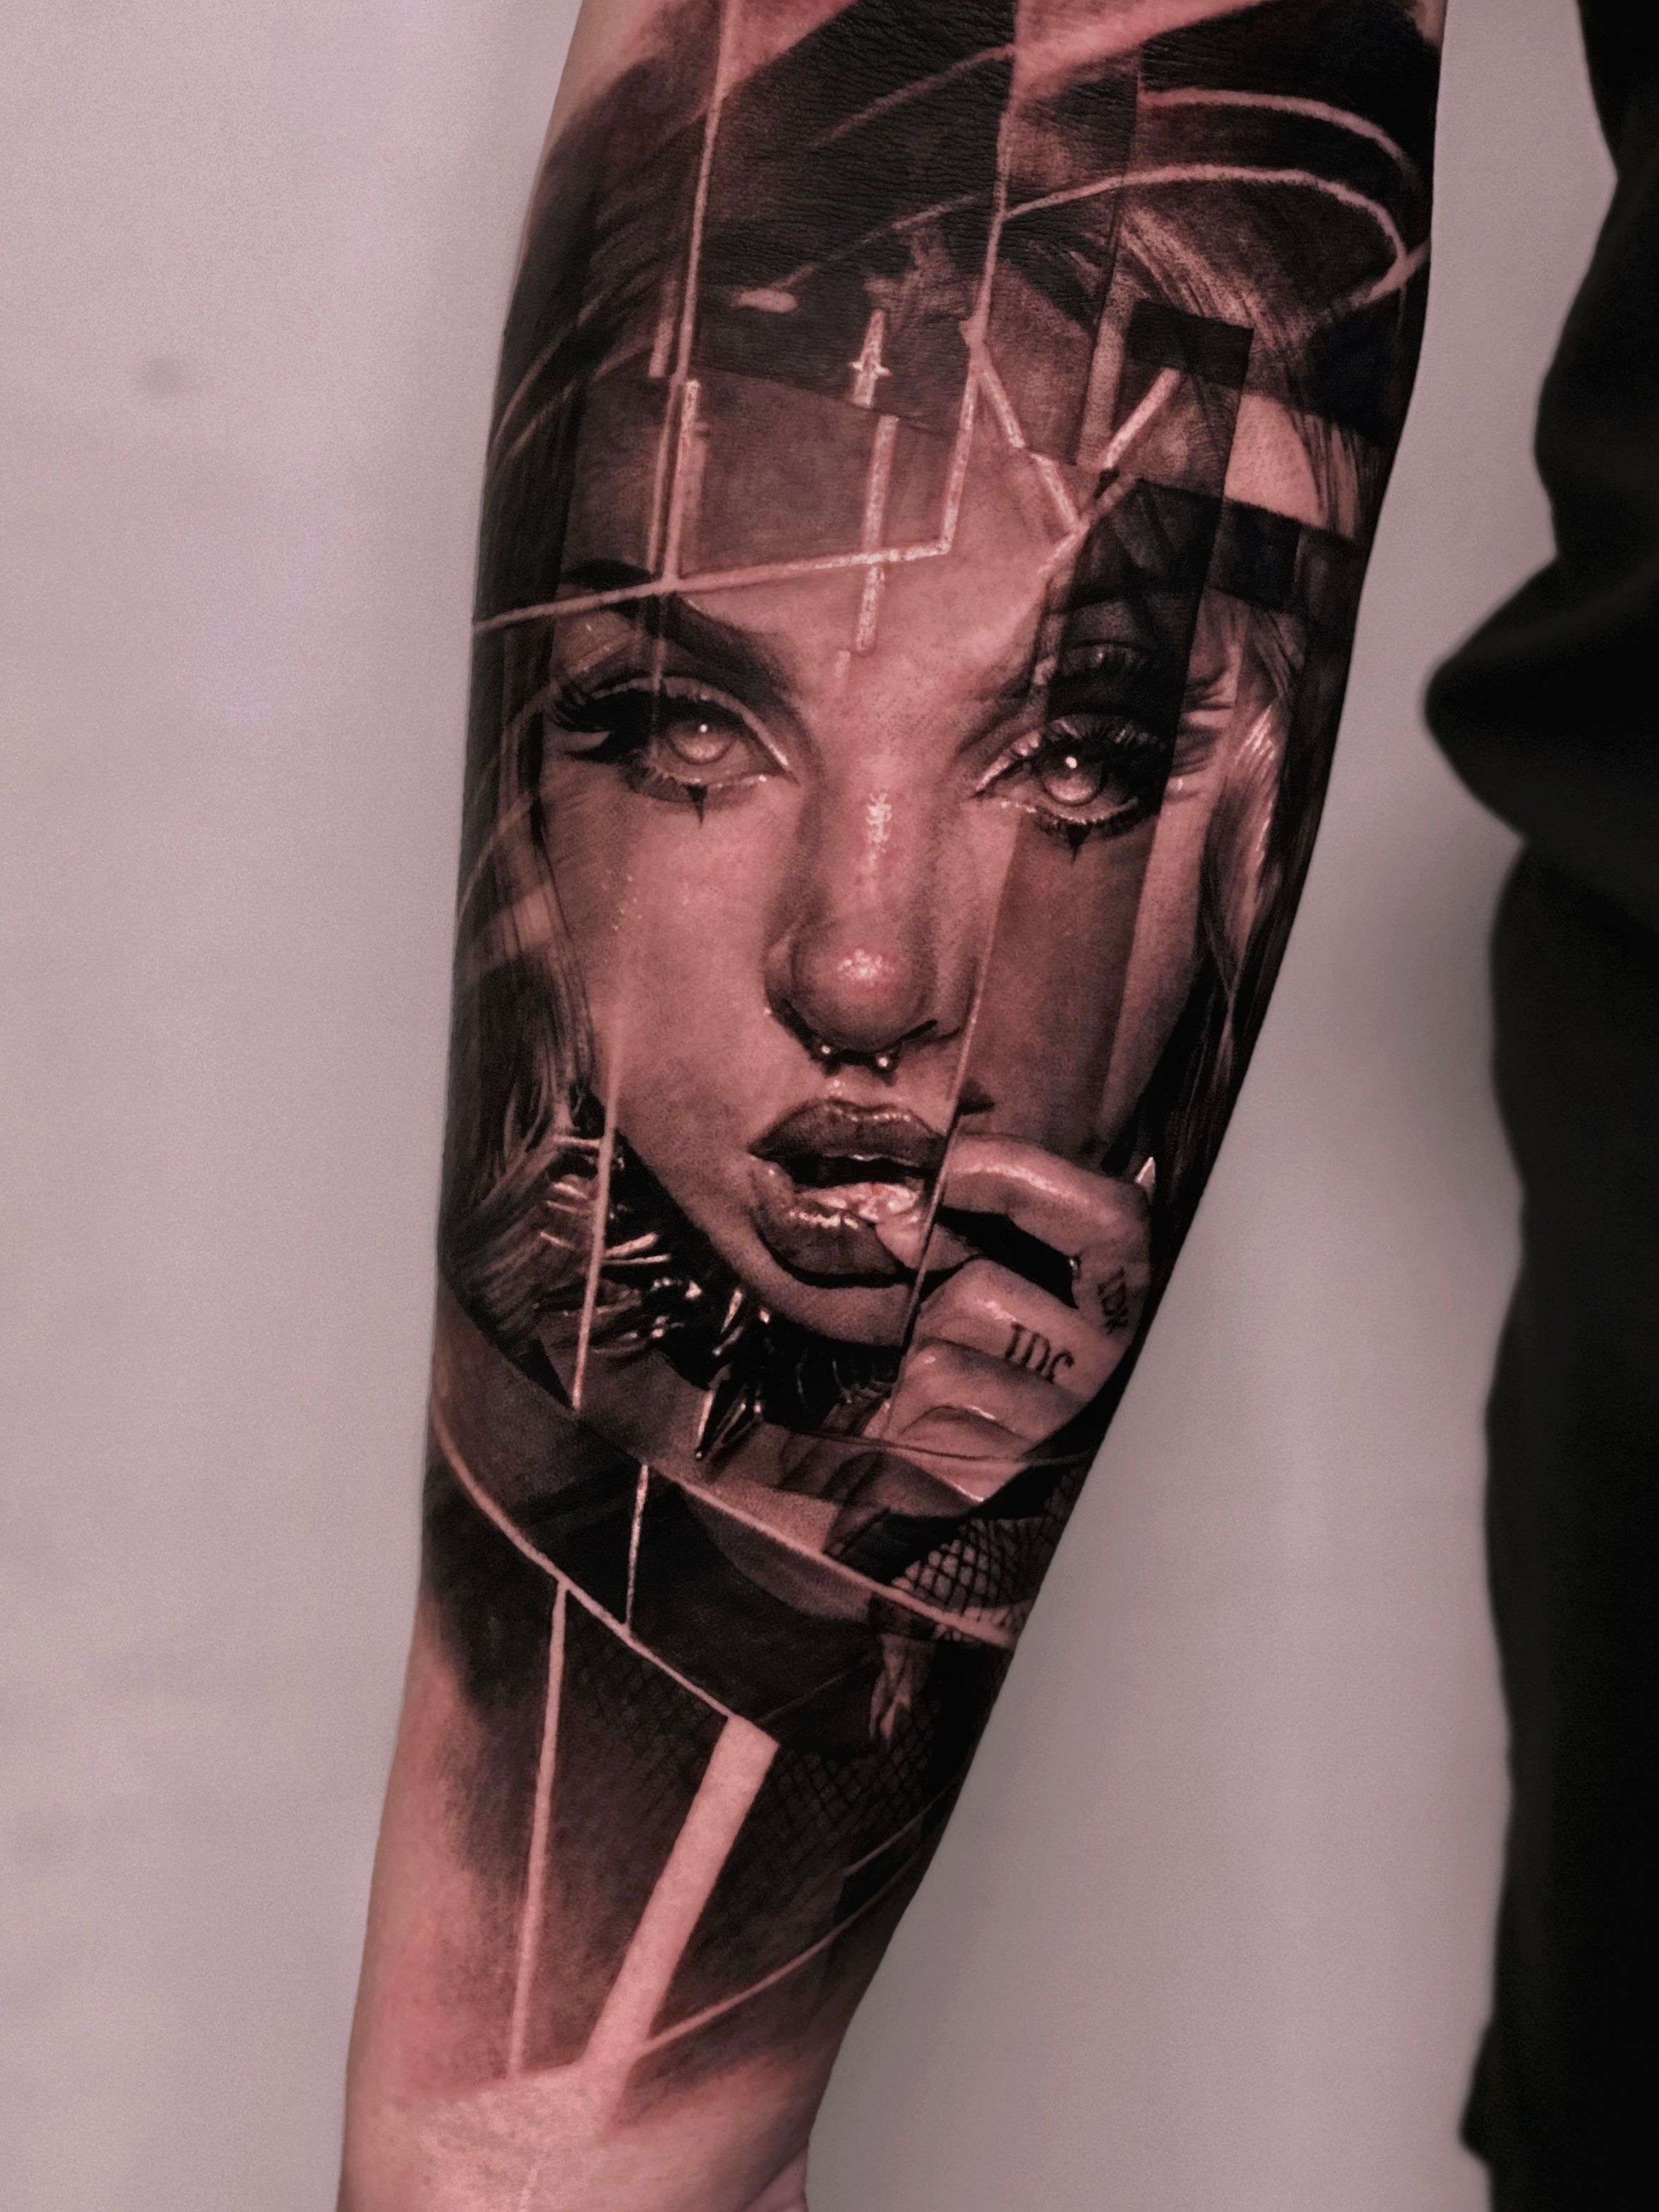 Realistic young Michael Jackson portrait tattoo on the